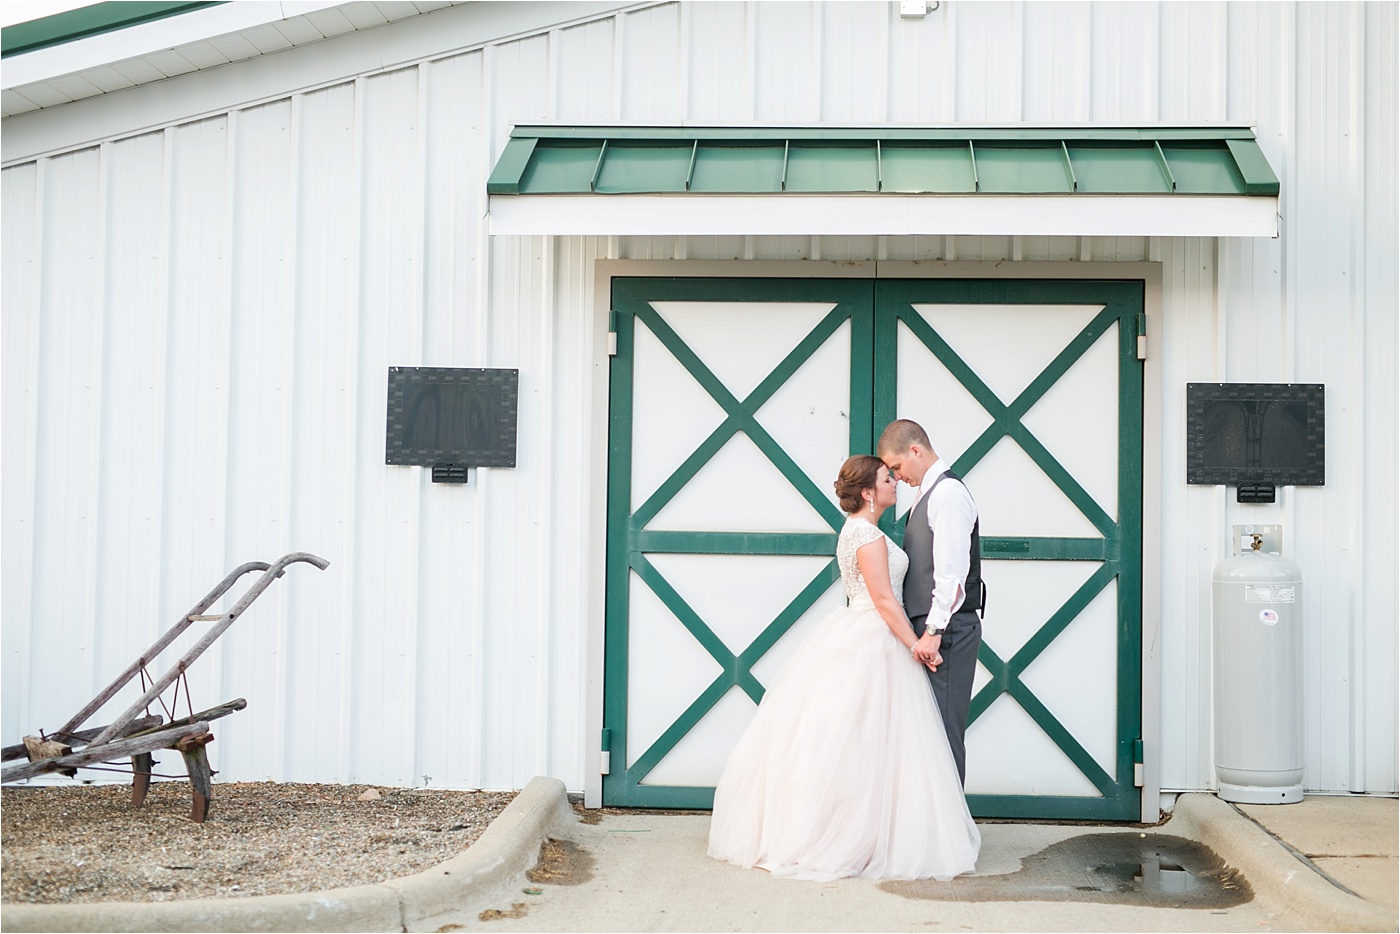 A Blush Outdoor wedding at Irongate Equestrian | KariMe Photography_0181